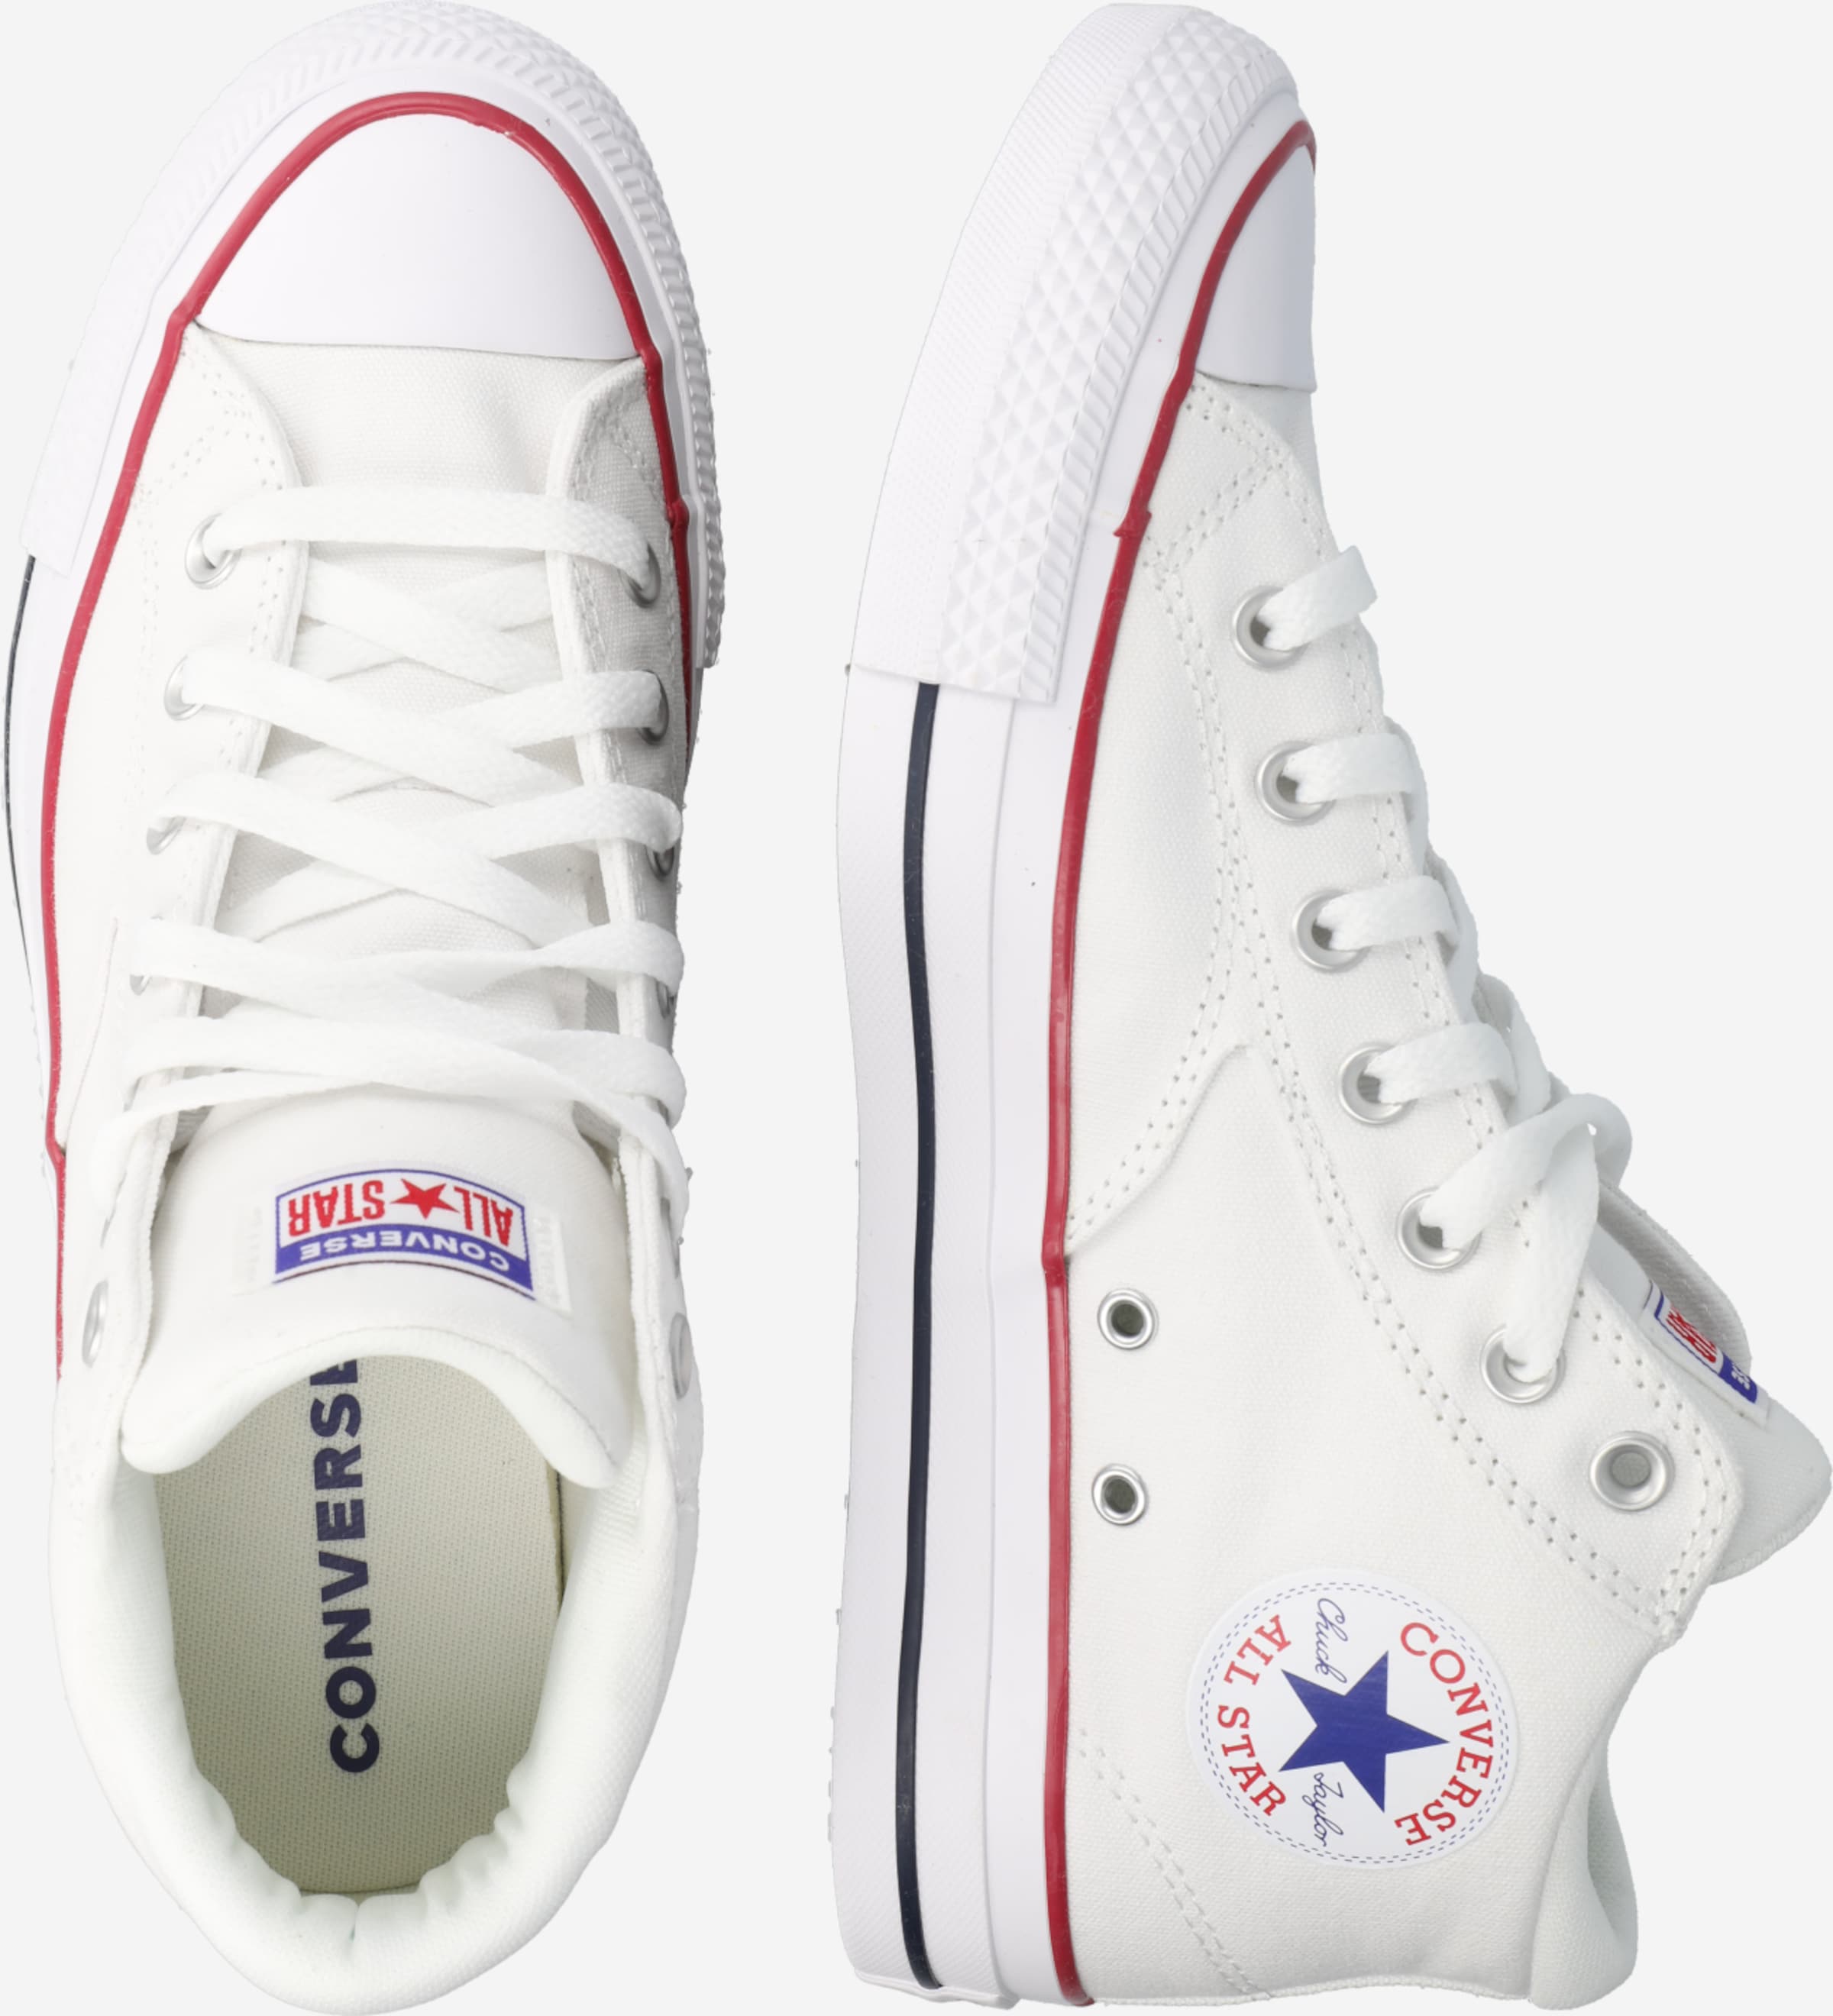 CONVERSE Sneaker \'Chuck Taylor All Star Malden Street\' in Weiß | ABOUT YOU